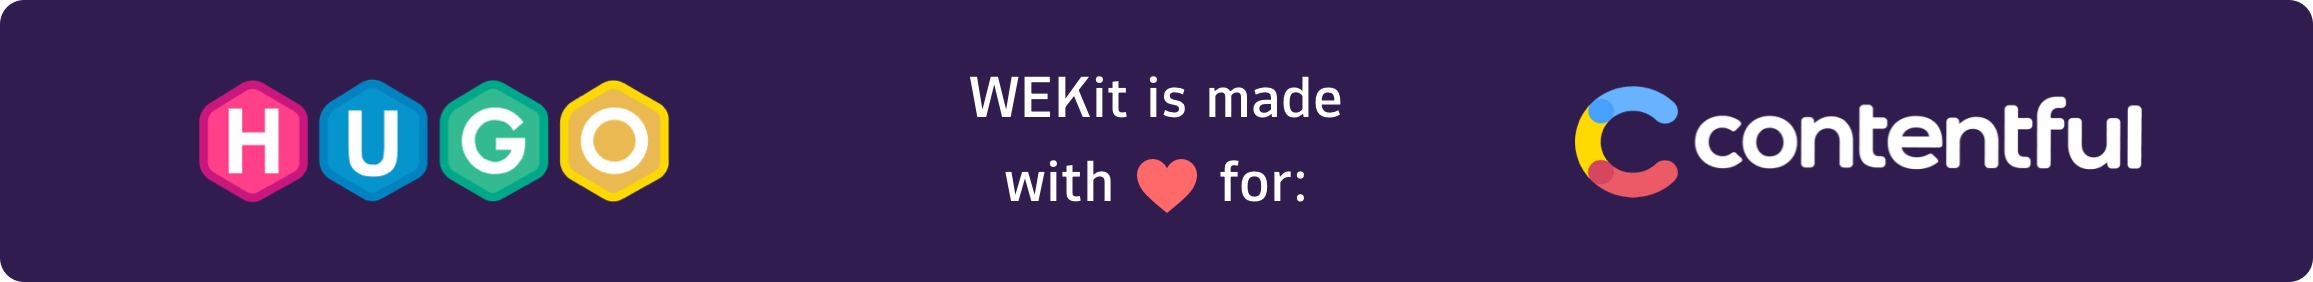 WEKit is made with love for Contentful & HUGO